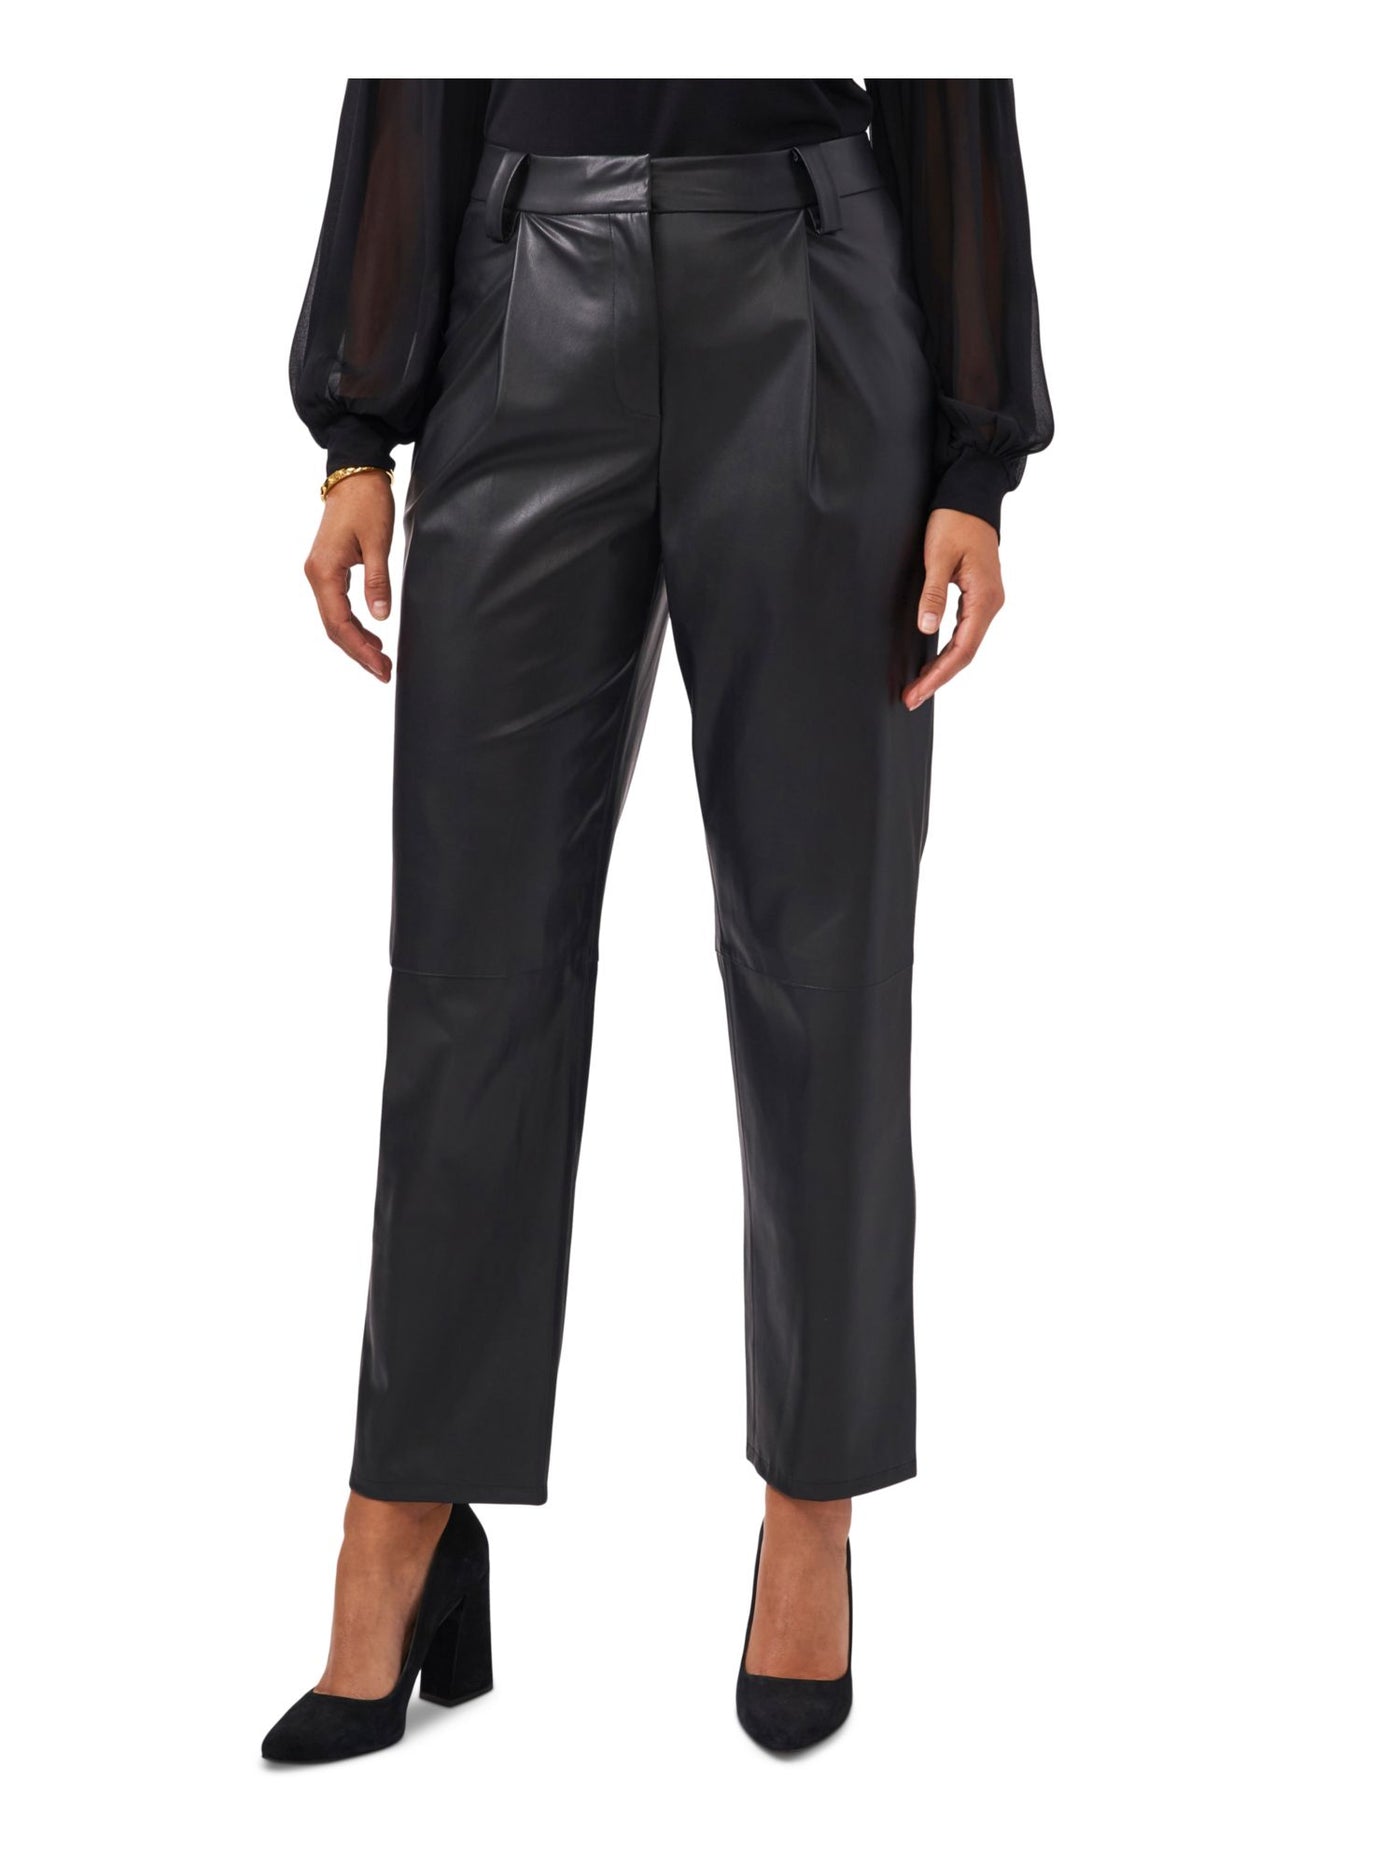 VINCE CAMUTO Womens Black Faux Leather Zippered Pocketed Hook-and-loop Closure Wear To Work Straight leg Pants 6